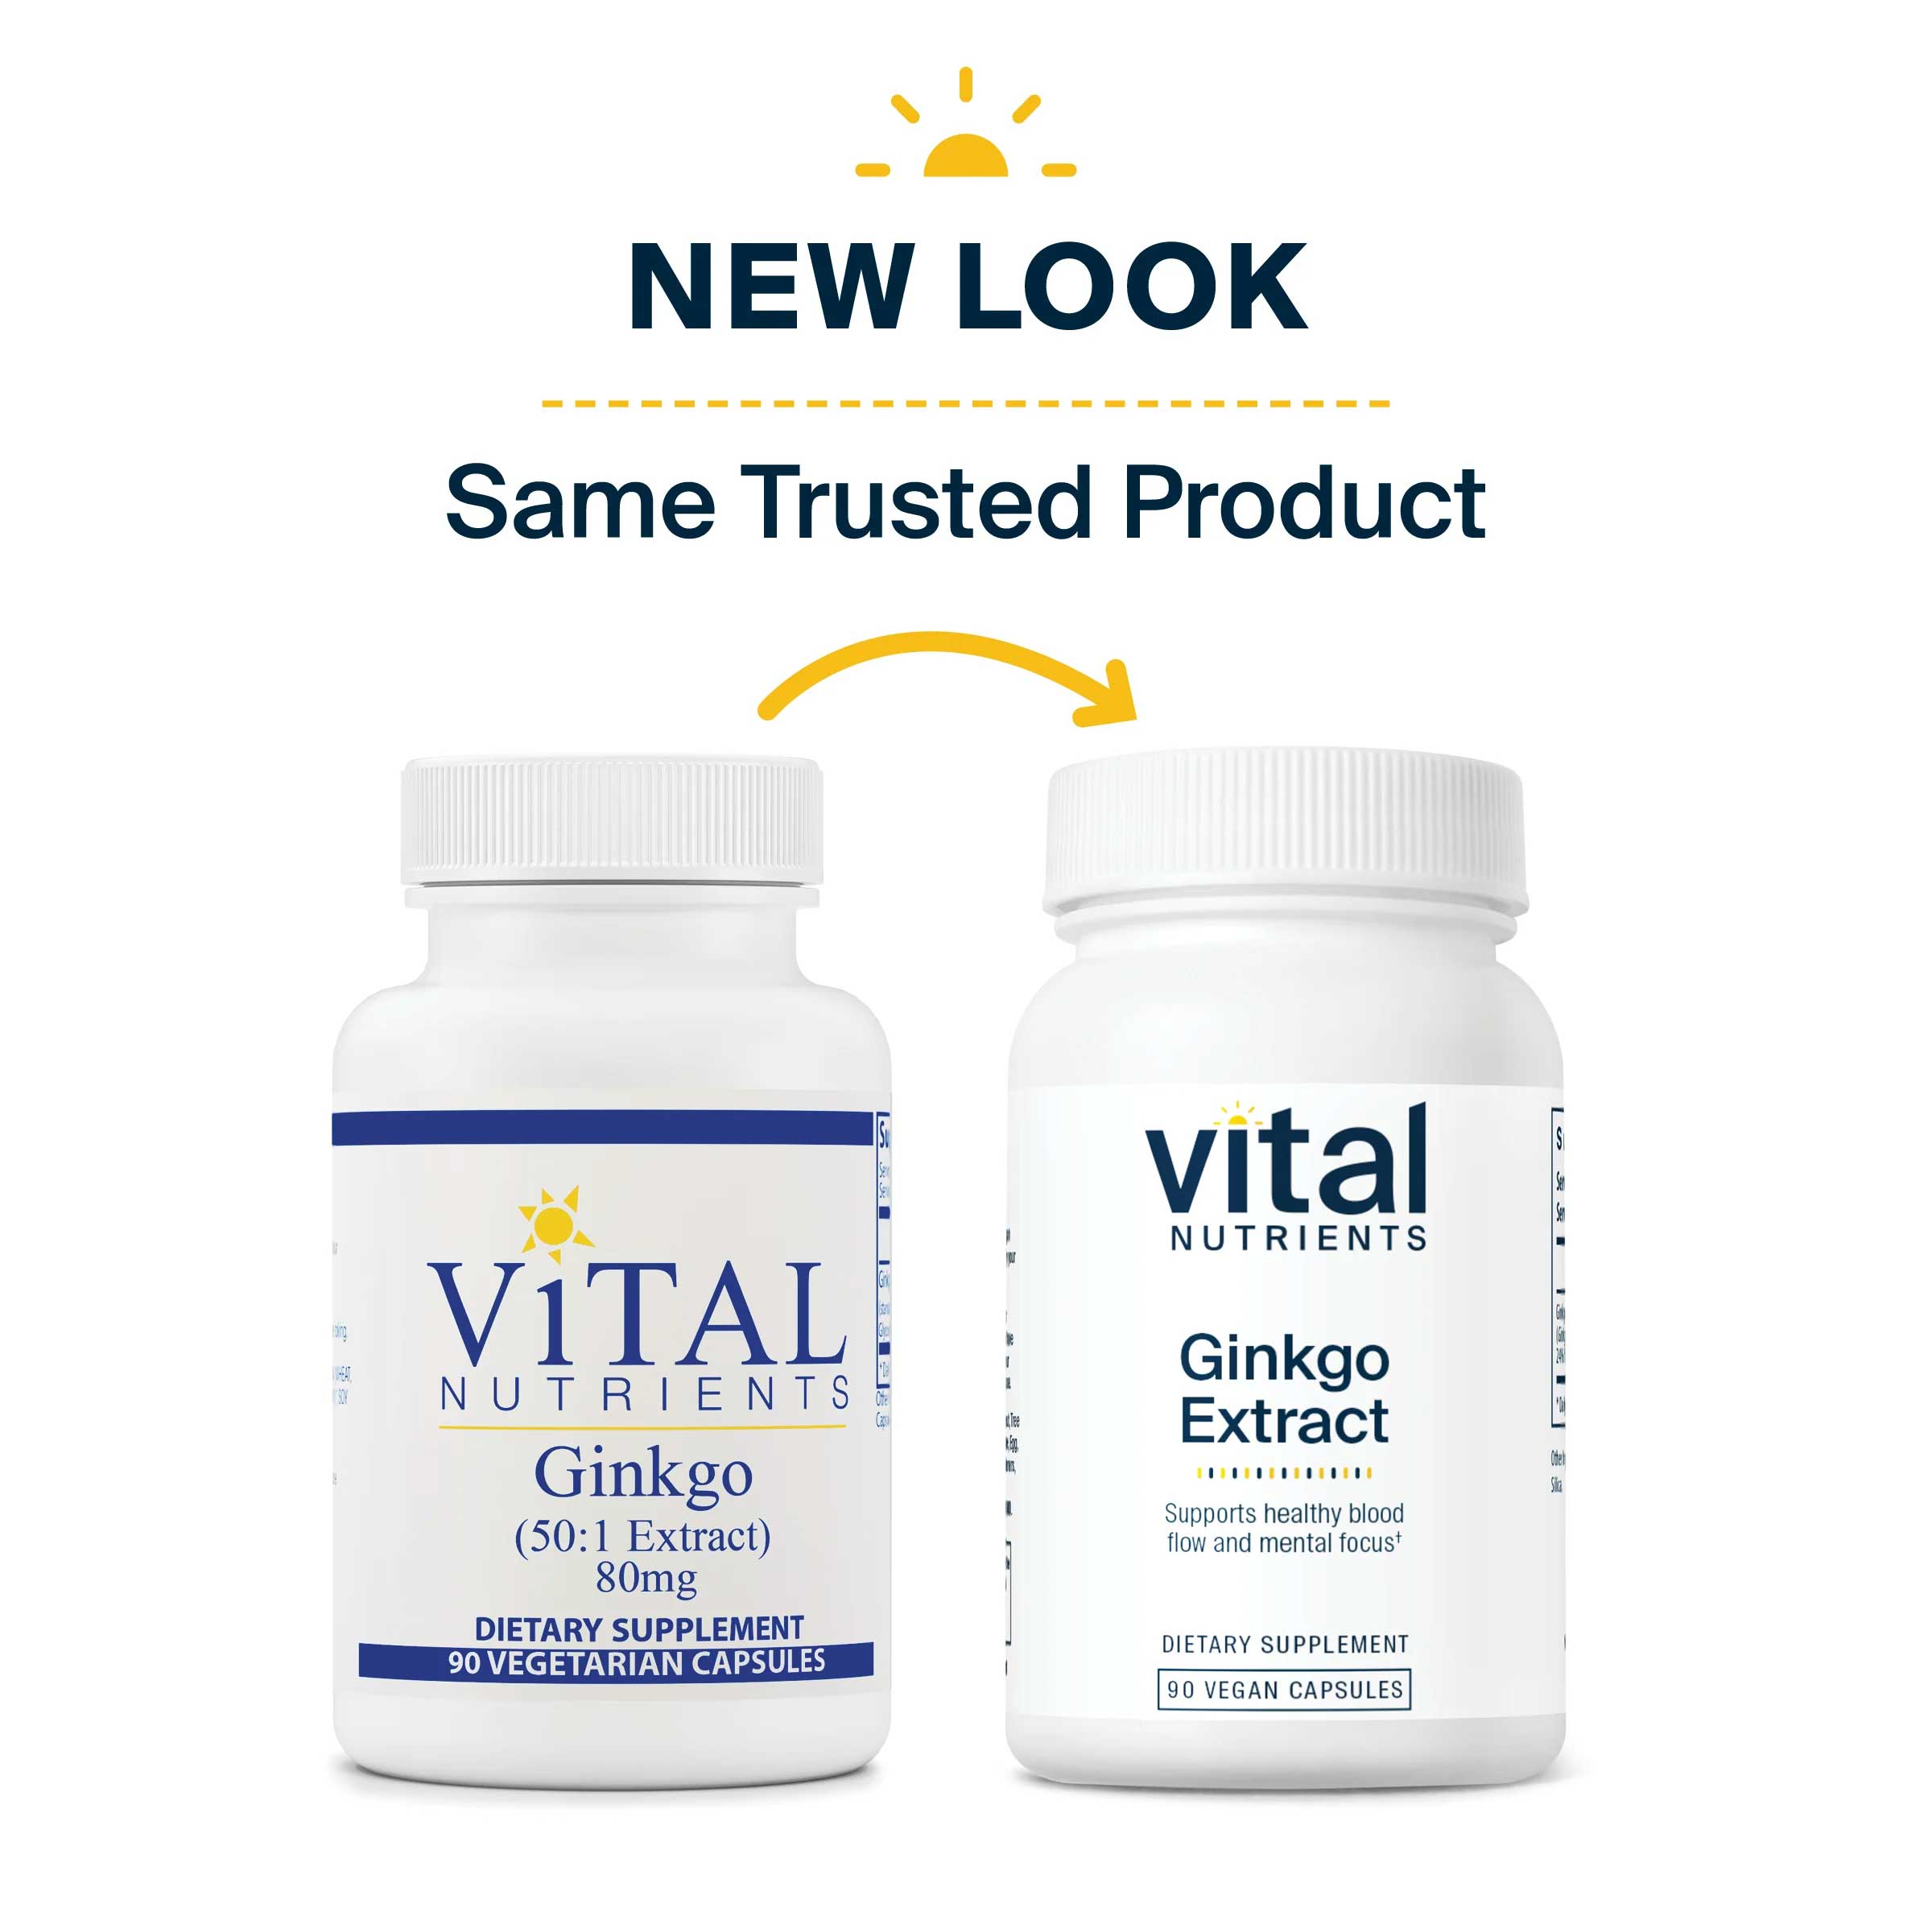 Vital Nutrients Ginkgo 50:1 Extract 80mg New Look